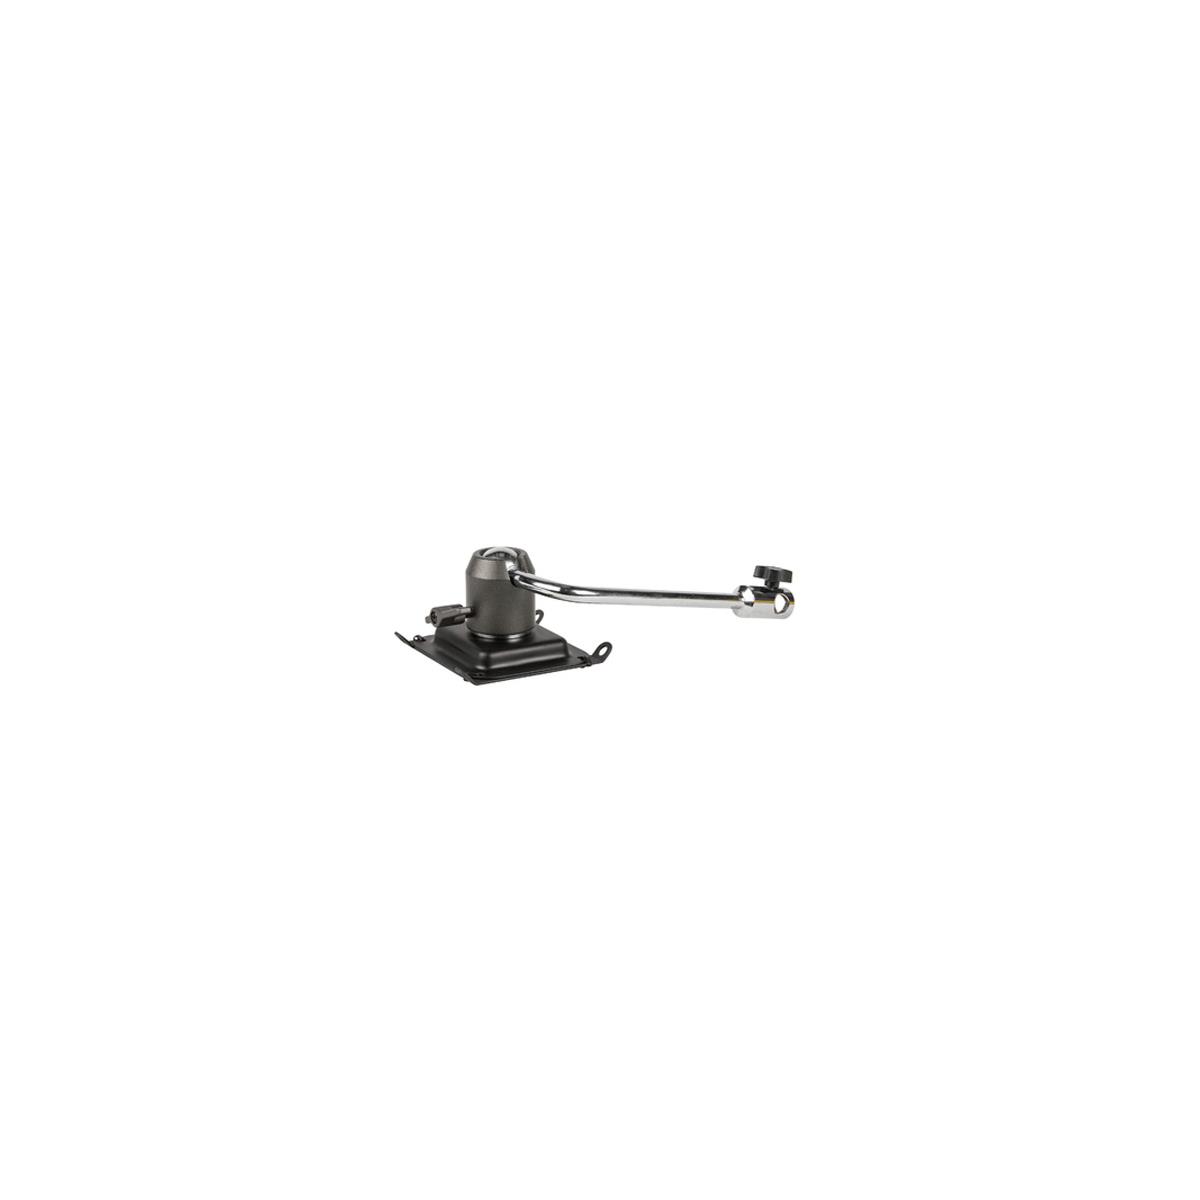 Image of Ikan Adjustable Arm for 1500 Series Light Fixtures